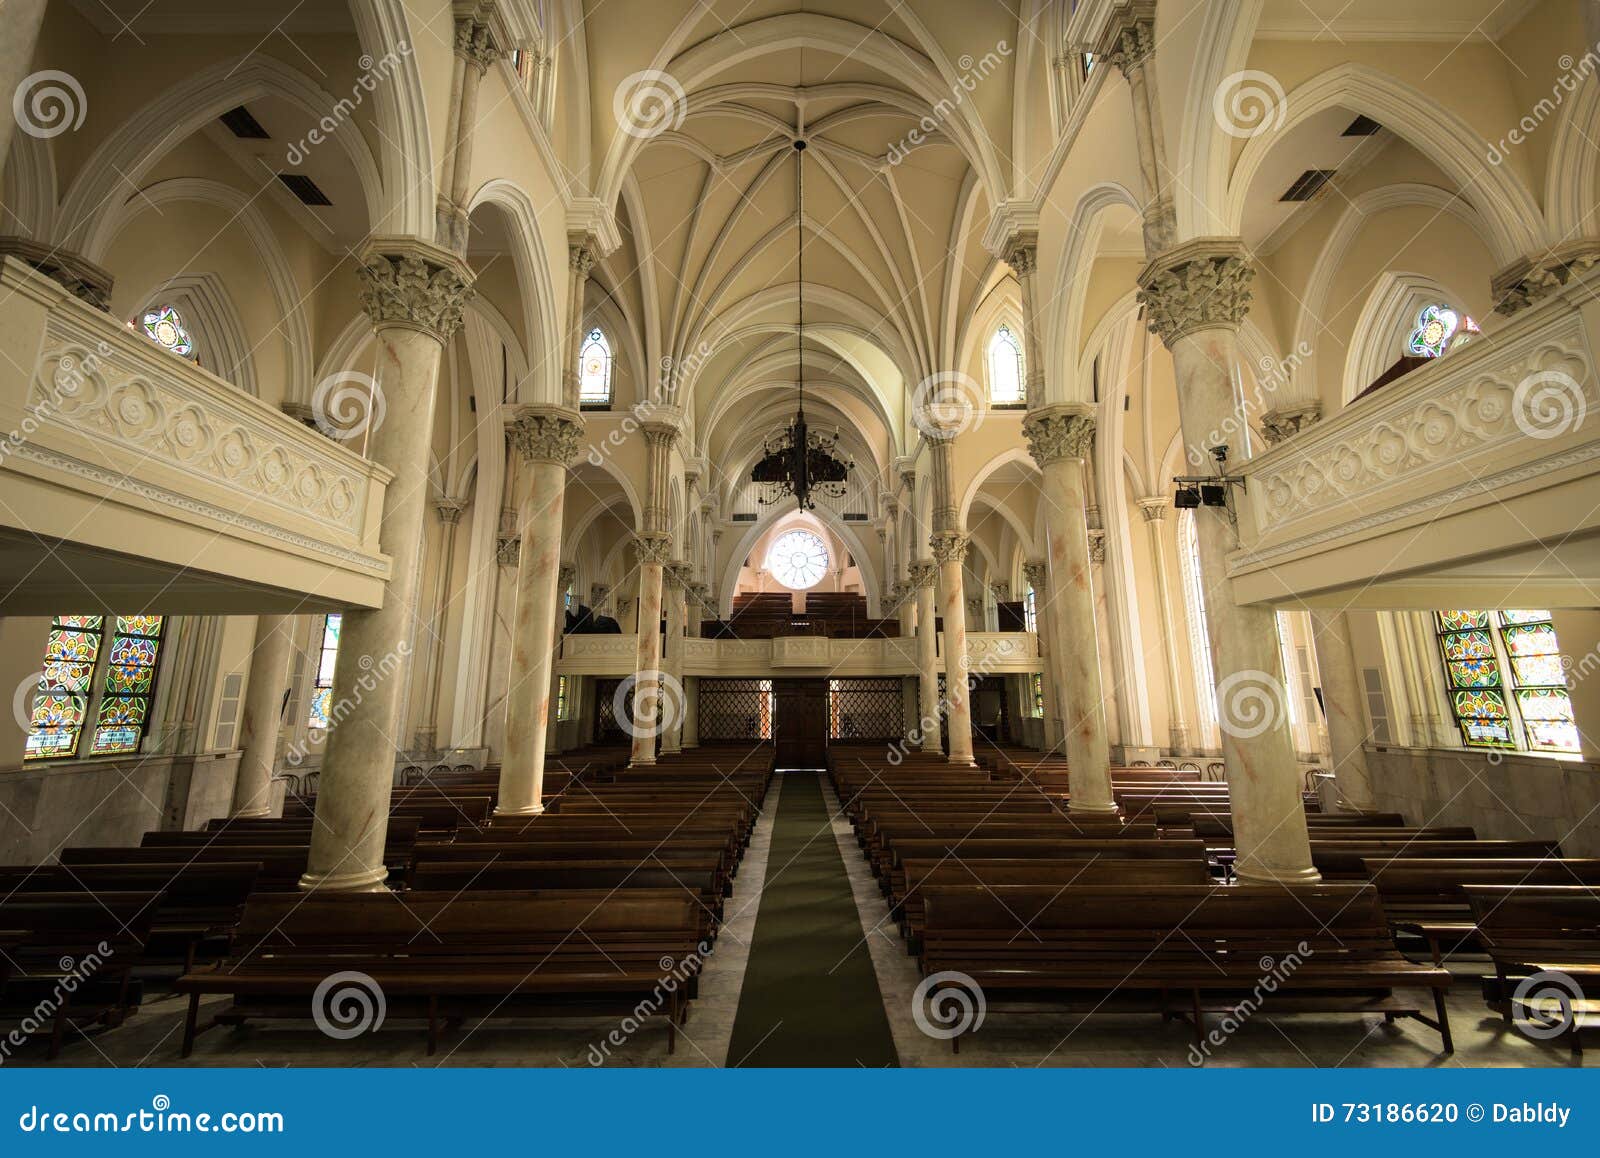 Gothic Style Church Interior Editorial Image Image Of